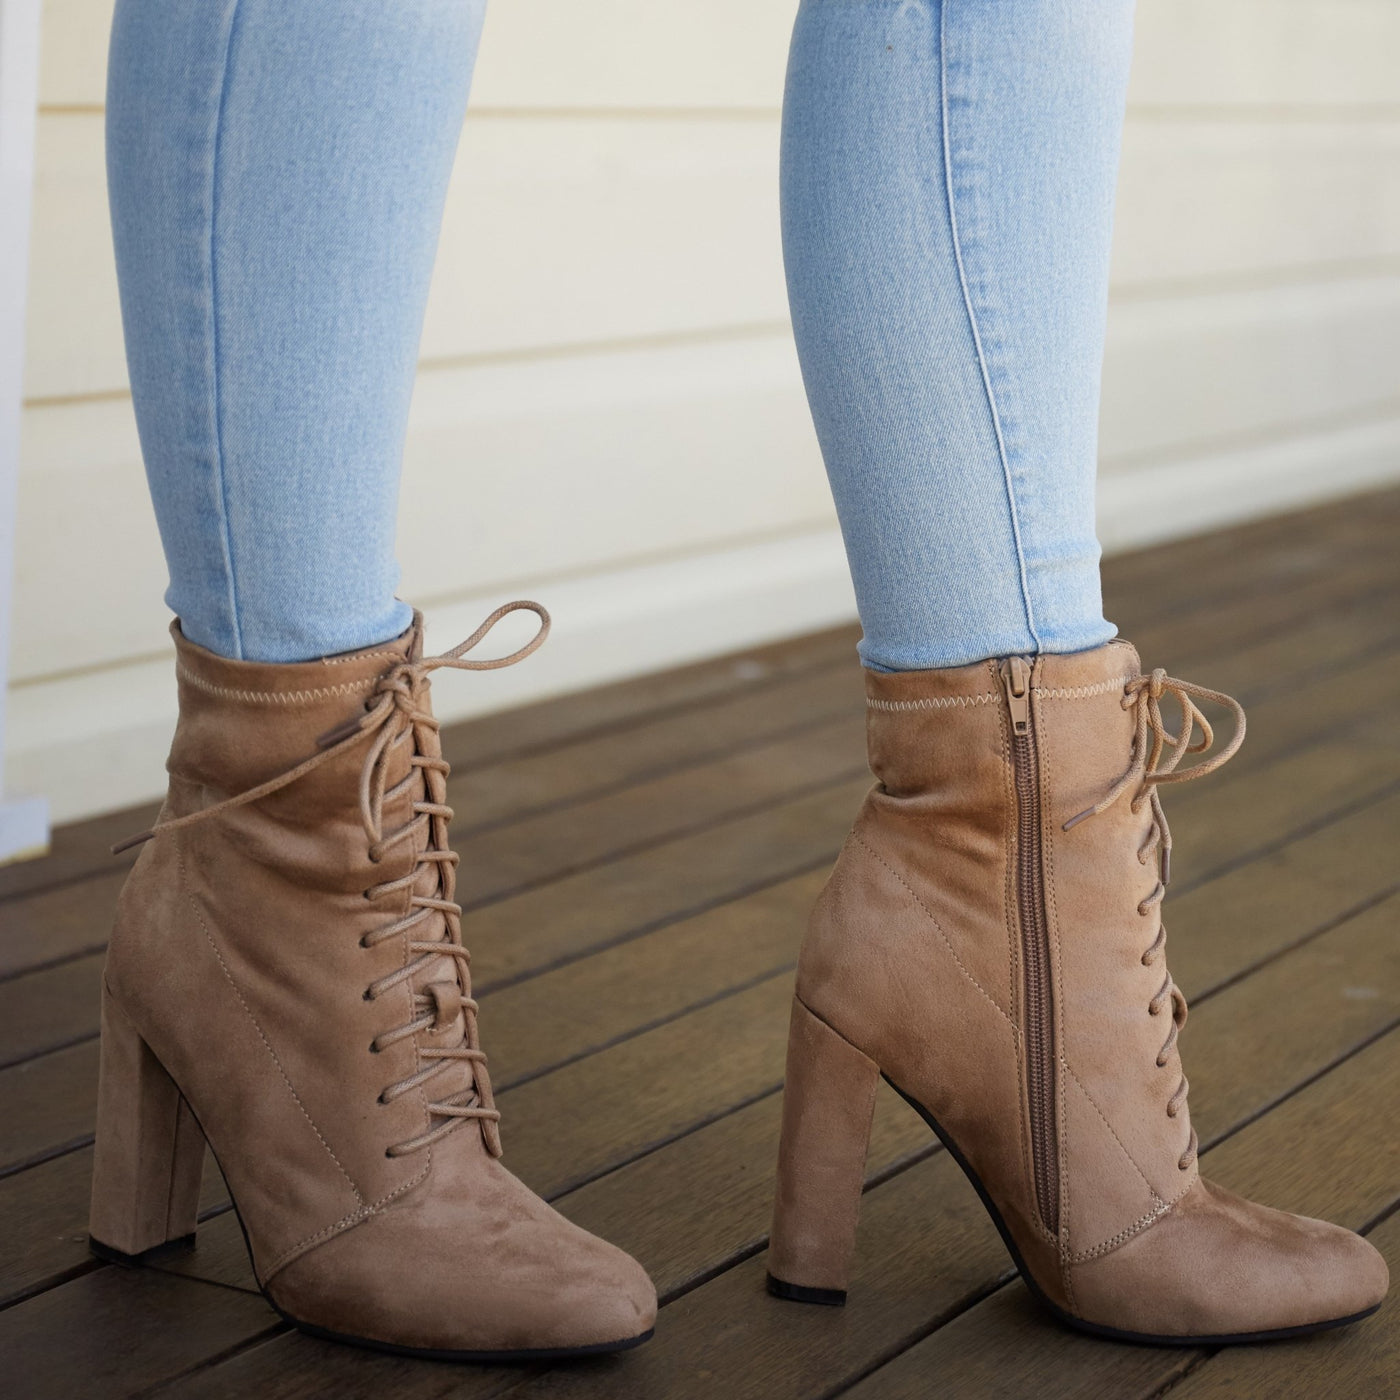 Therapy Aiken Lace Up Ankle Boot in Taupe Suede - Hey Sara